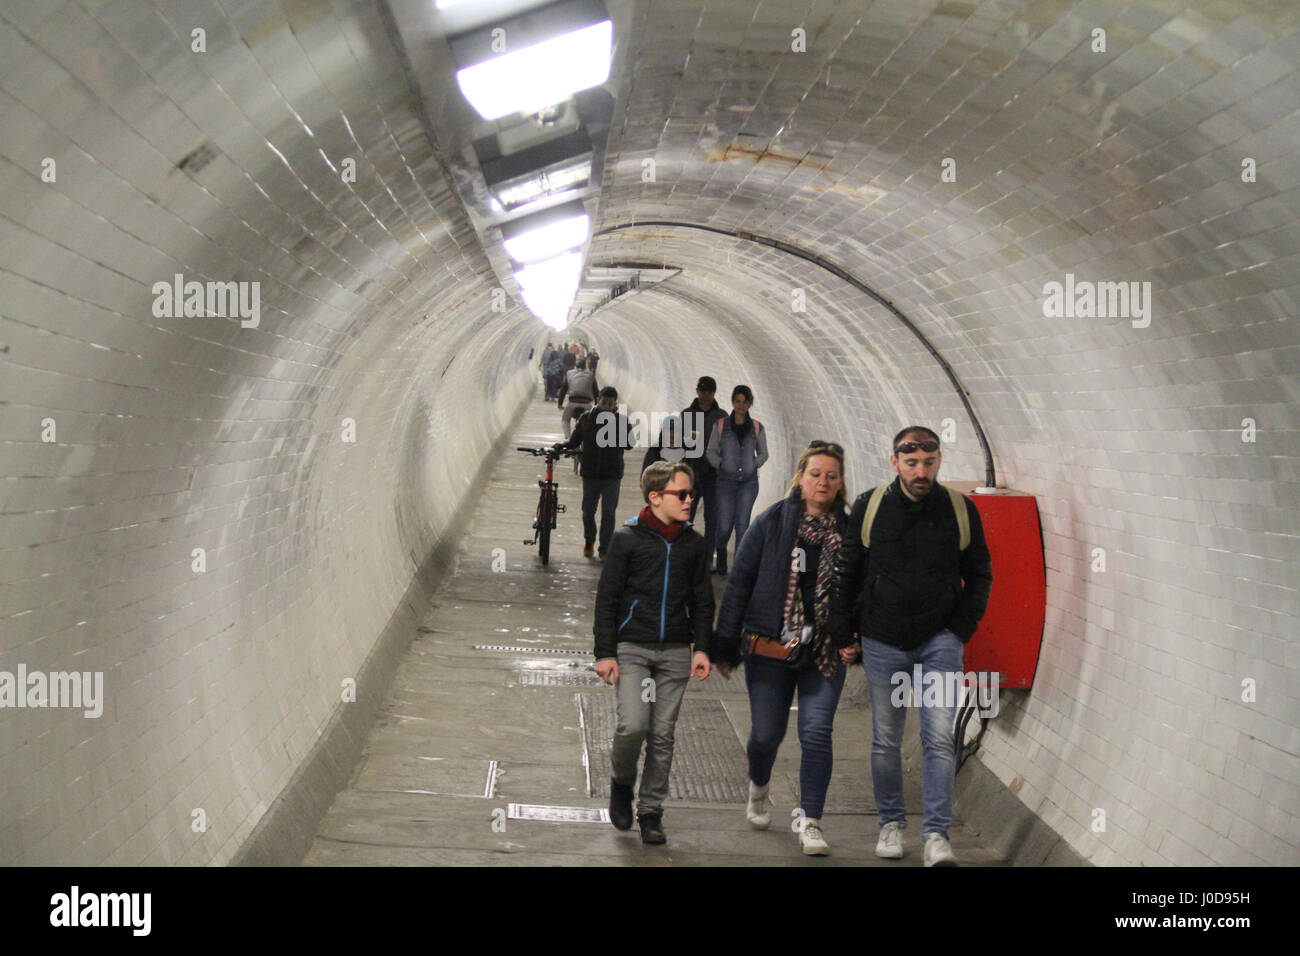 London, UK. 12th Apr, 2017. London, United Kingdom - April 12: People seen walking through the Greenwich foot tunnel on April 12 2017. The tunnel link Isle of Dogs on the north, with the Greenwich town centre. Credit: David Mbiyu/Alamy Live News Stock Photo